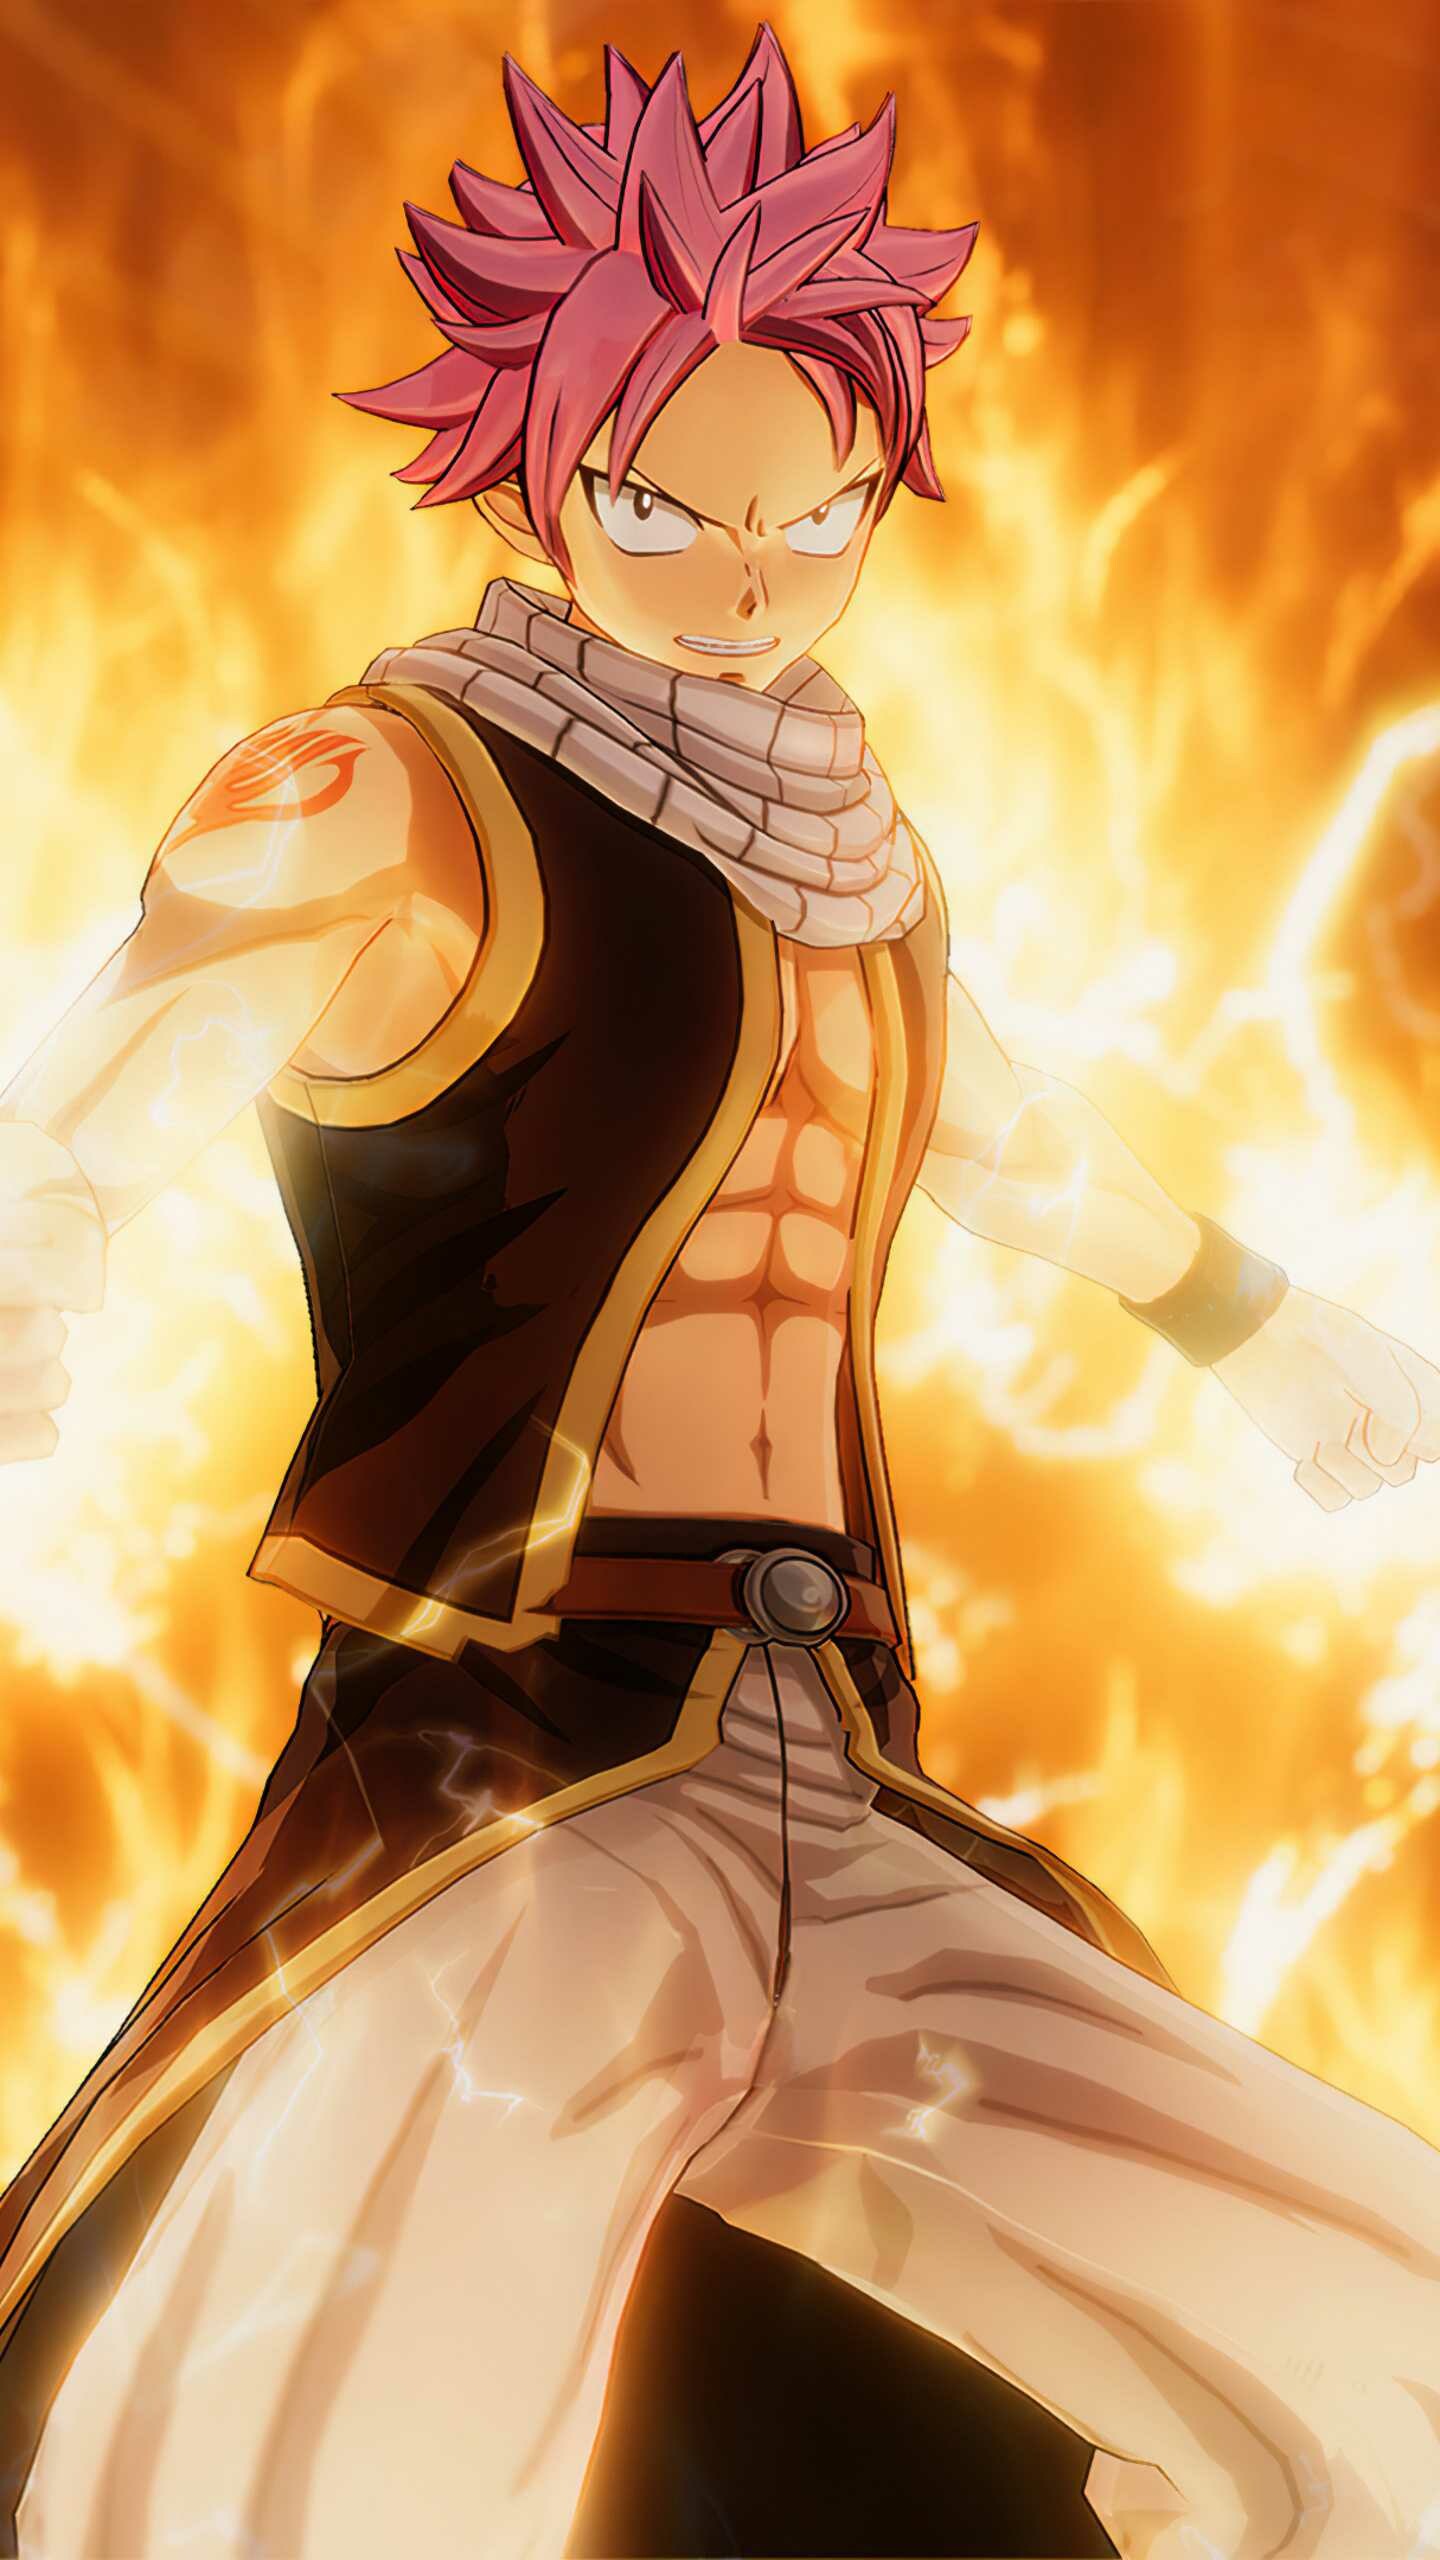 Fairy Tail: Natsu Dragneel, becomes one of the guild's most destructive members known as "Salamander". 1440x2560 HD Background.